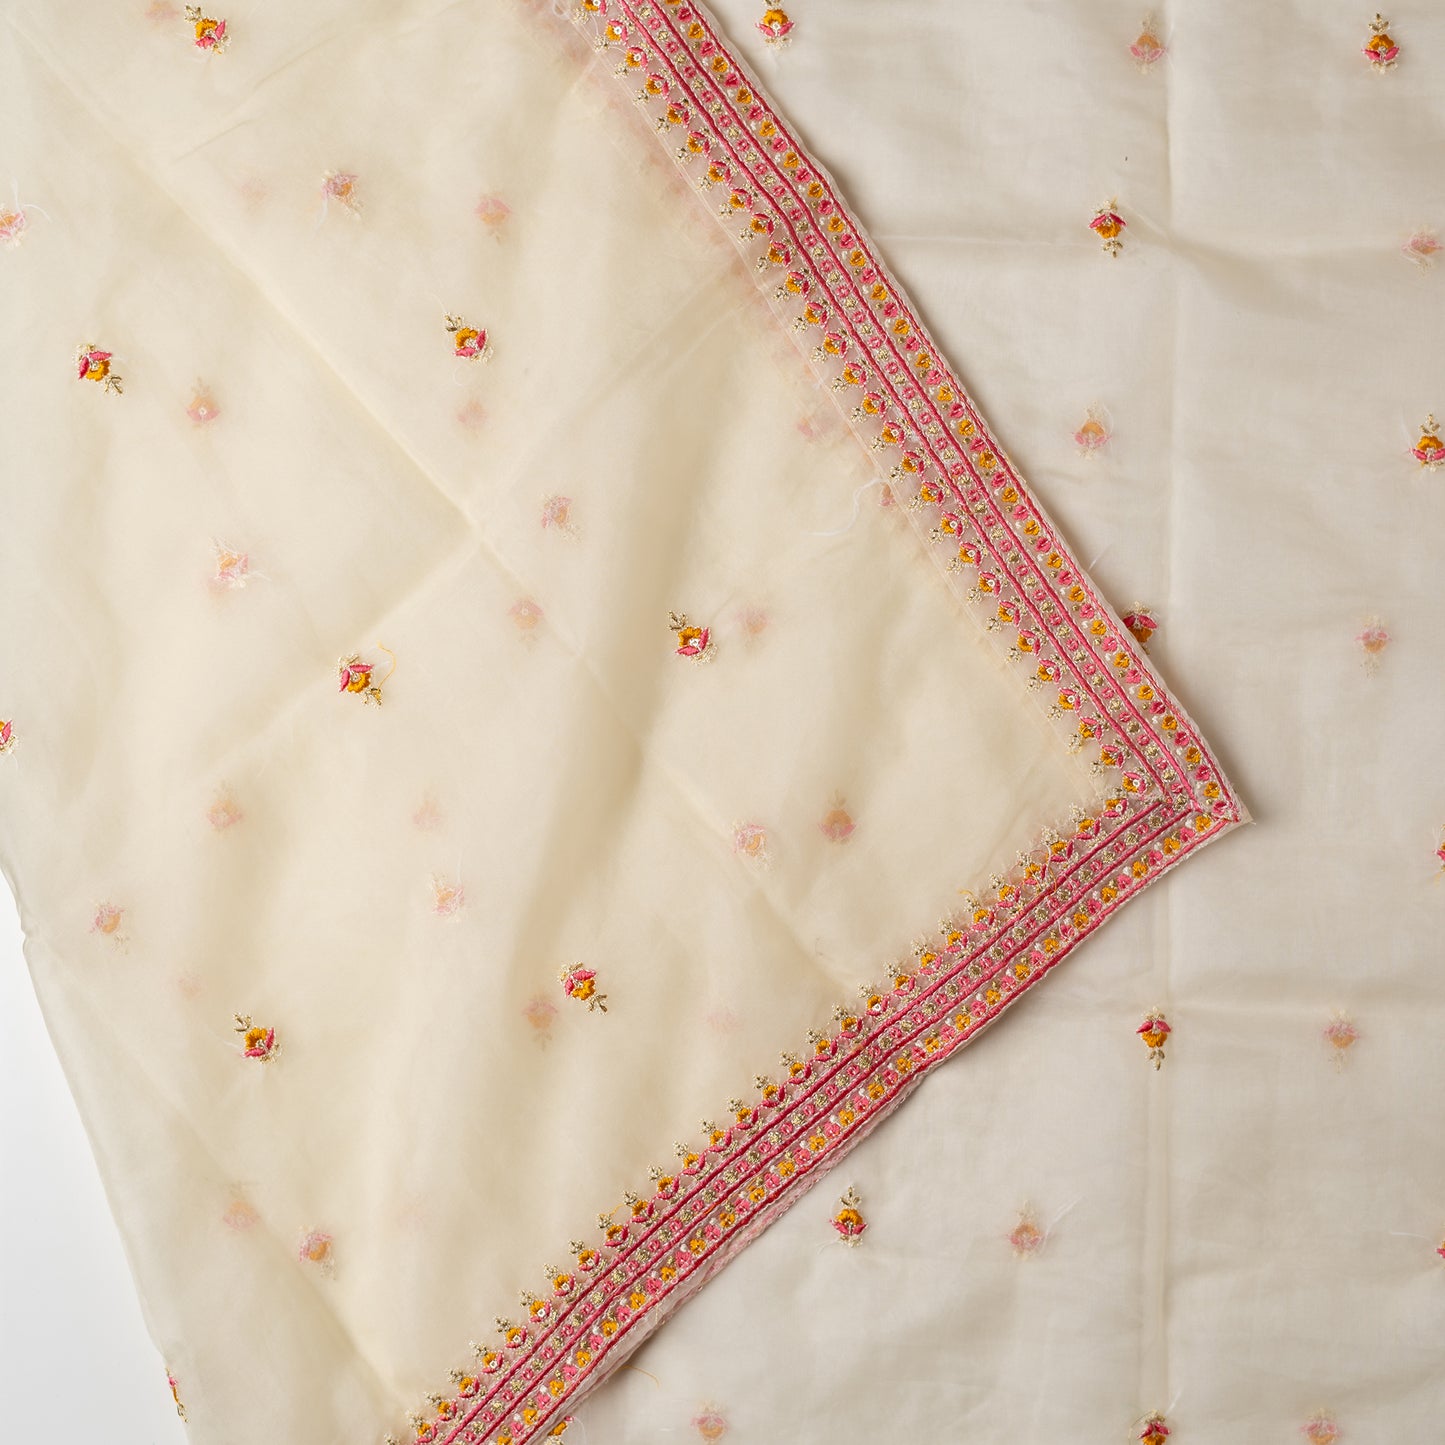 Matching cream color dupatta with embroidery work all over and on the borders.